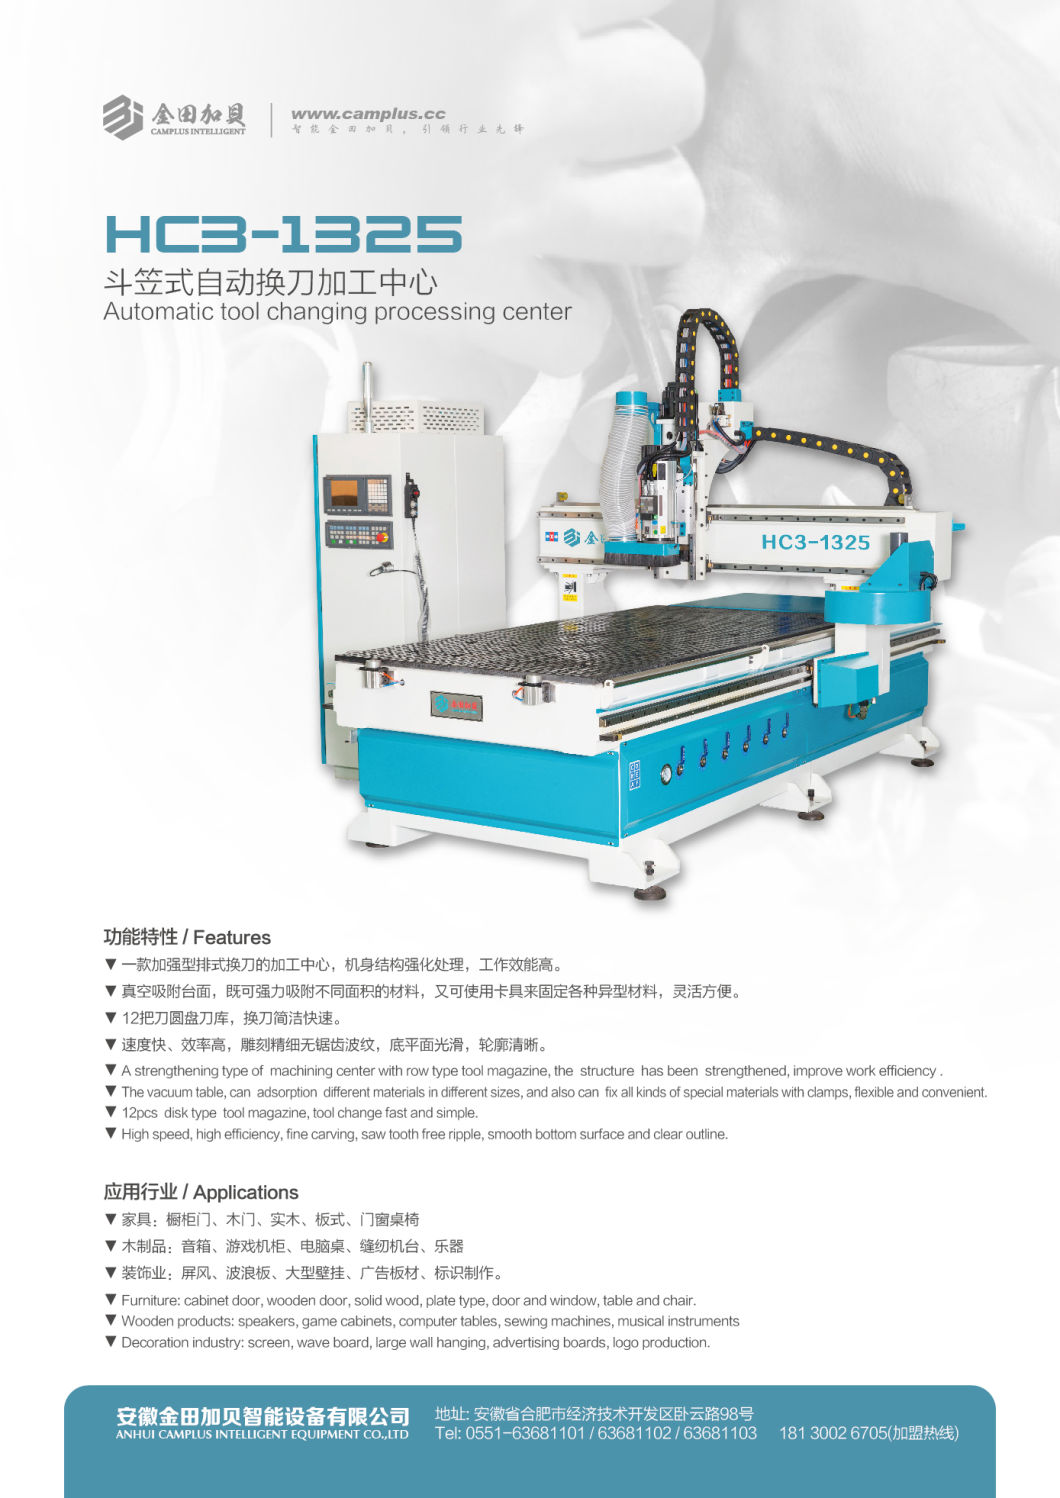 Automatic Tool Changing Processing Center Hc3-1325 for Furniture/Wooden Products/Decoration Engraving and Cutting